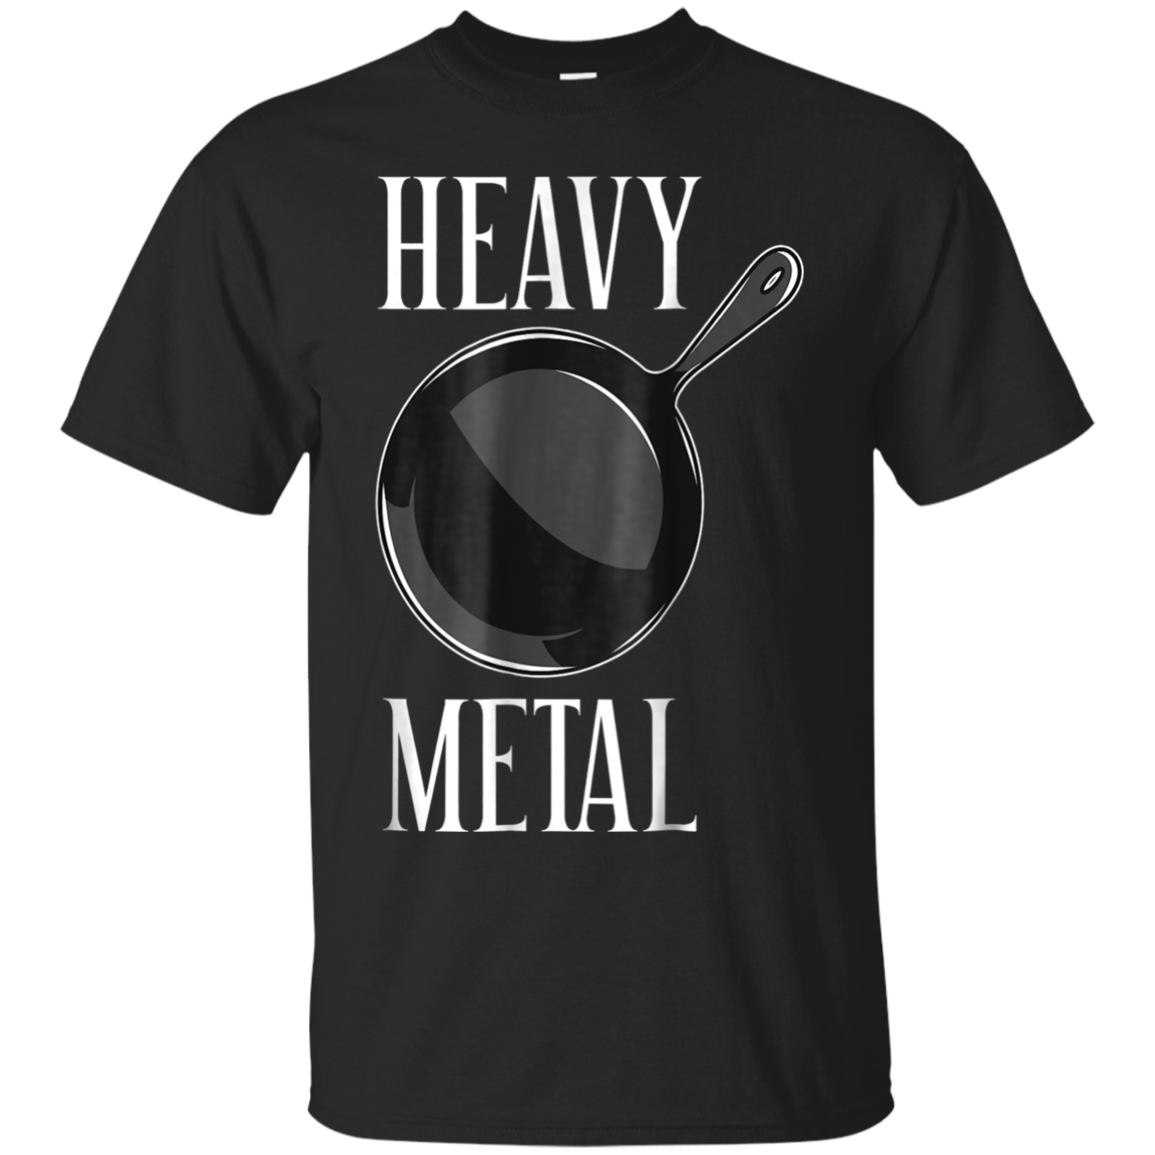 Unbelievable Heavy Metal Cast Iron Cooking Shirt Funny Cooking T Shirt